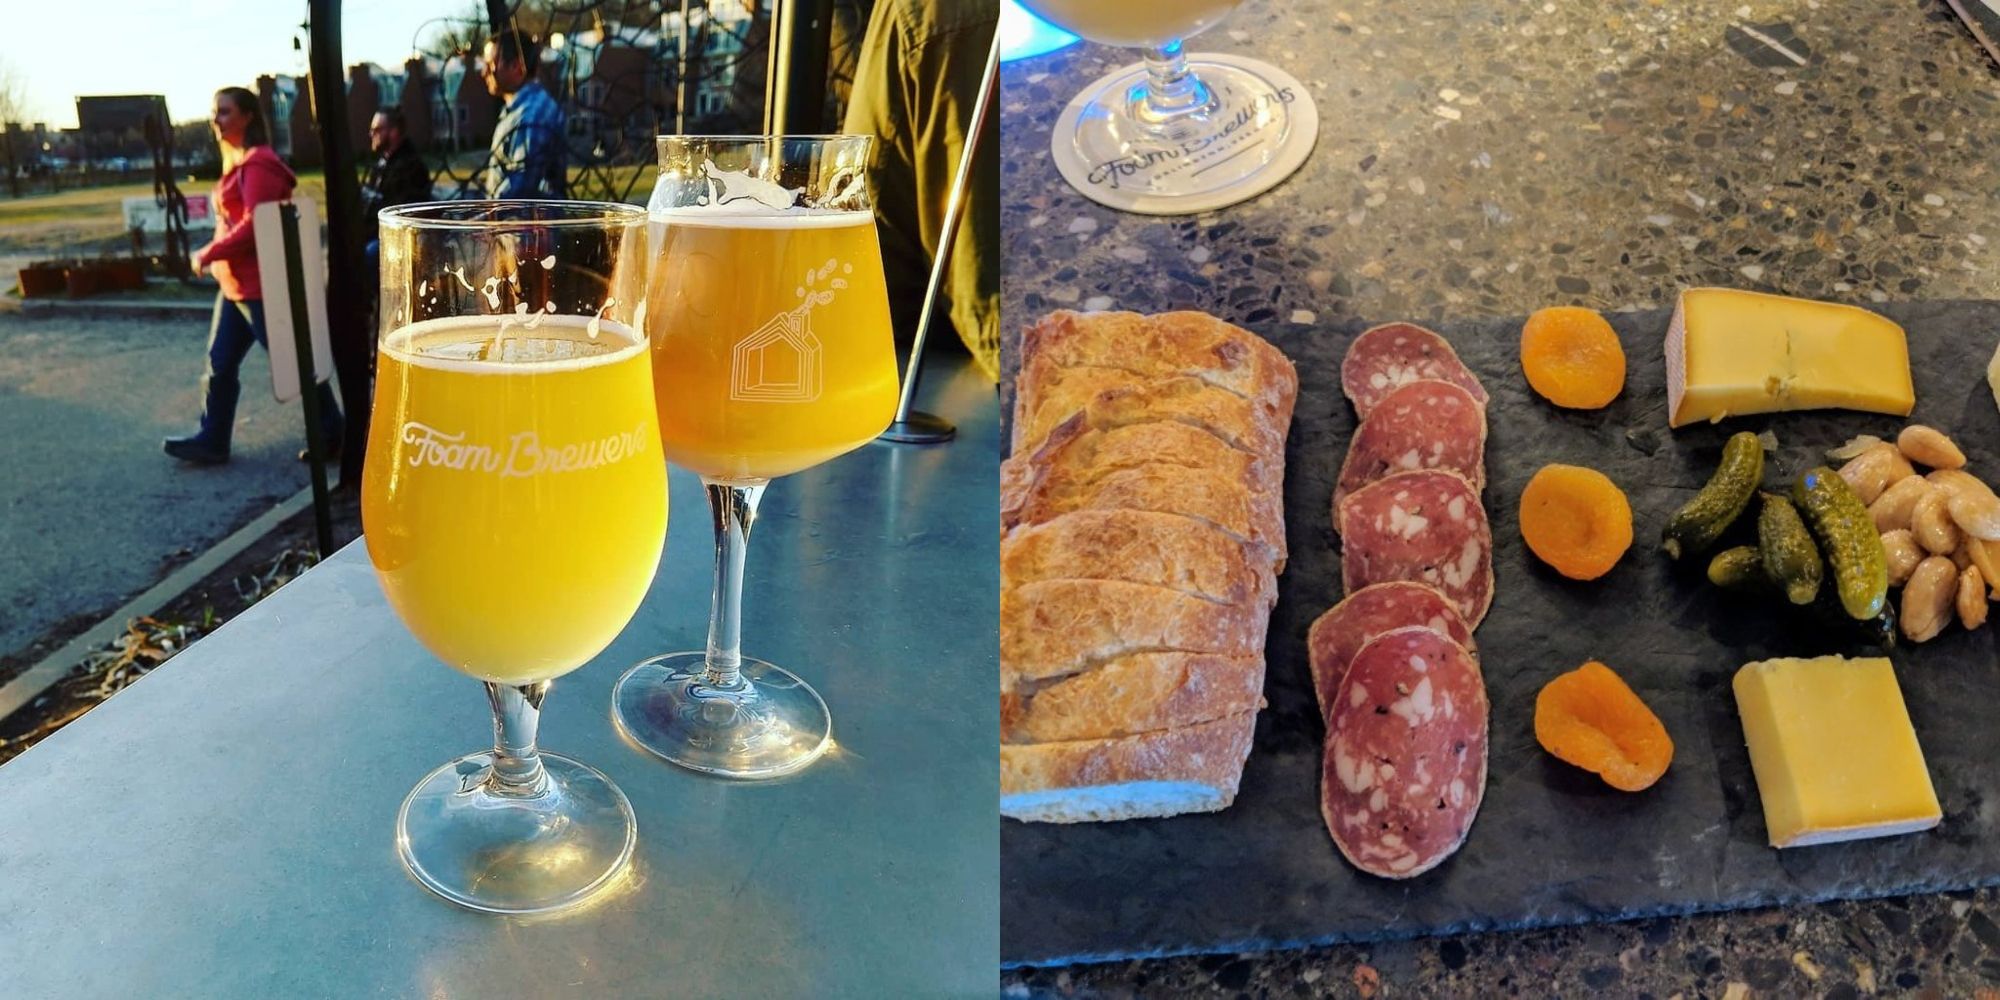 beer on table and charcuterie board